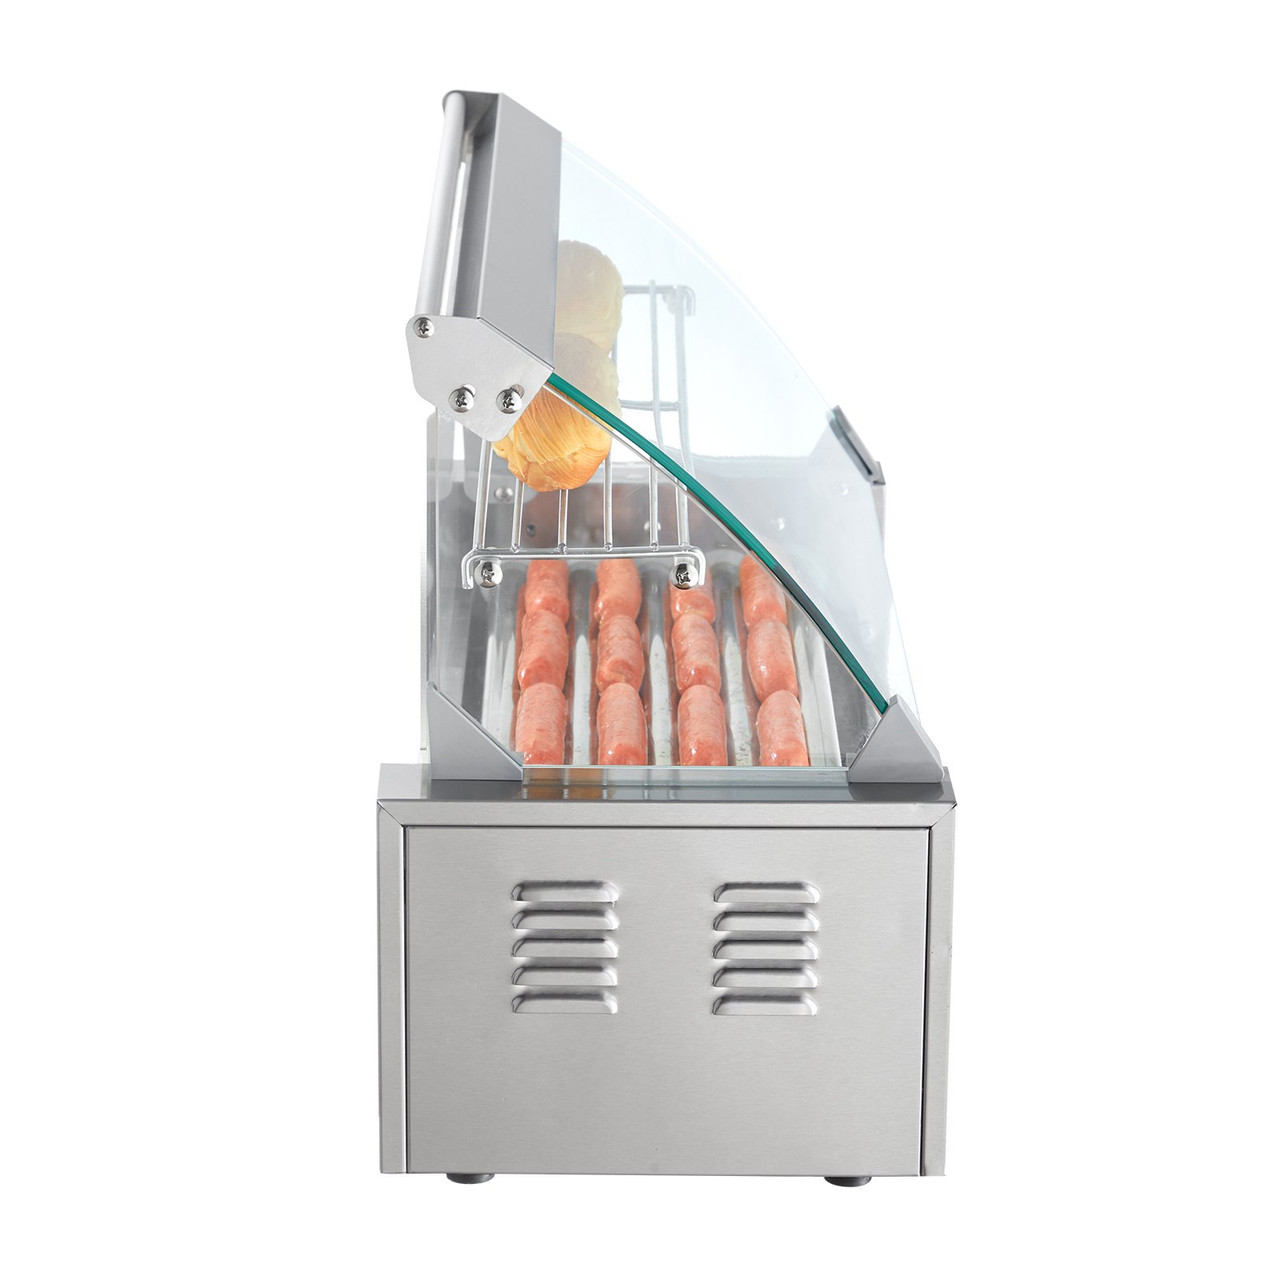 Hot Dog Roller 5 Rollers 12 Hot Dogs Capacity, 750W Stainless Sausage Grill Cooker Machine with Dual Temp Control Glass Hood Acrylic Cover Bun Warmer Shelf Removable Oil Drip Tray ETL Certified